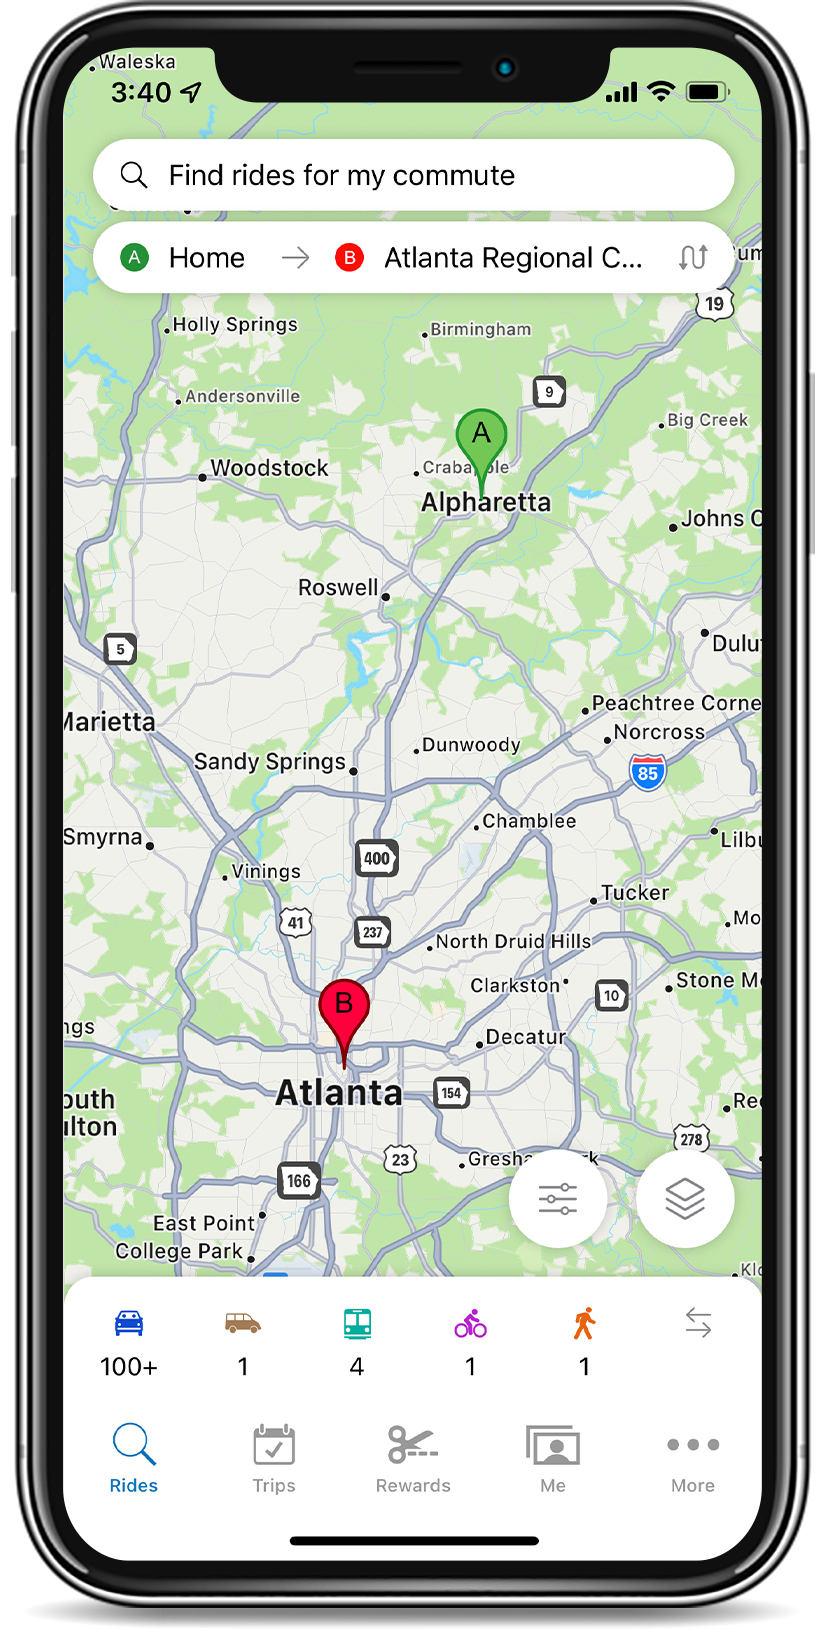 Ride matching on iPhone app